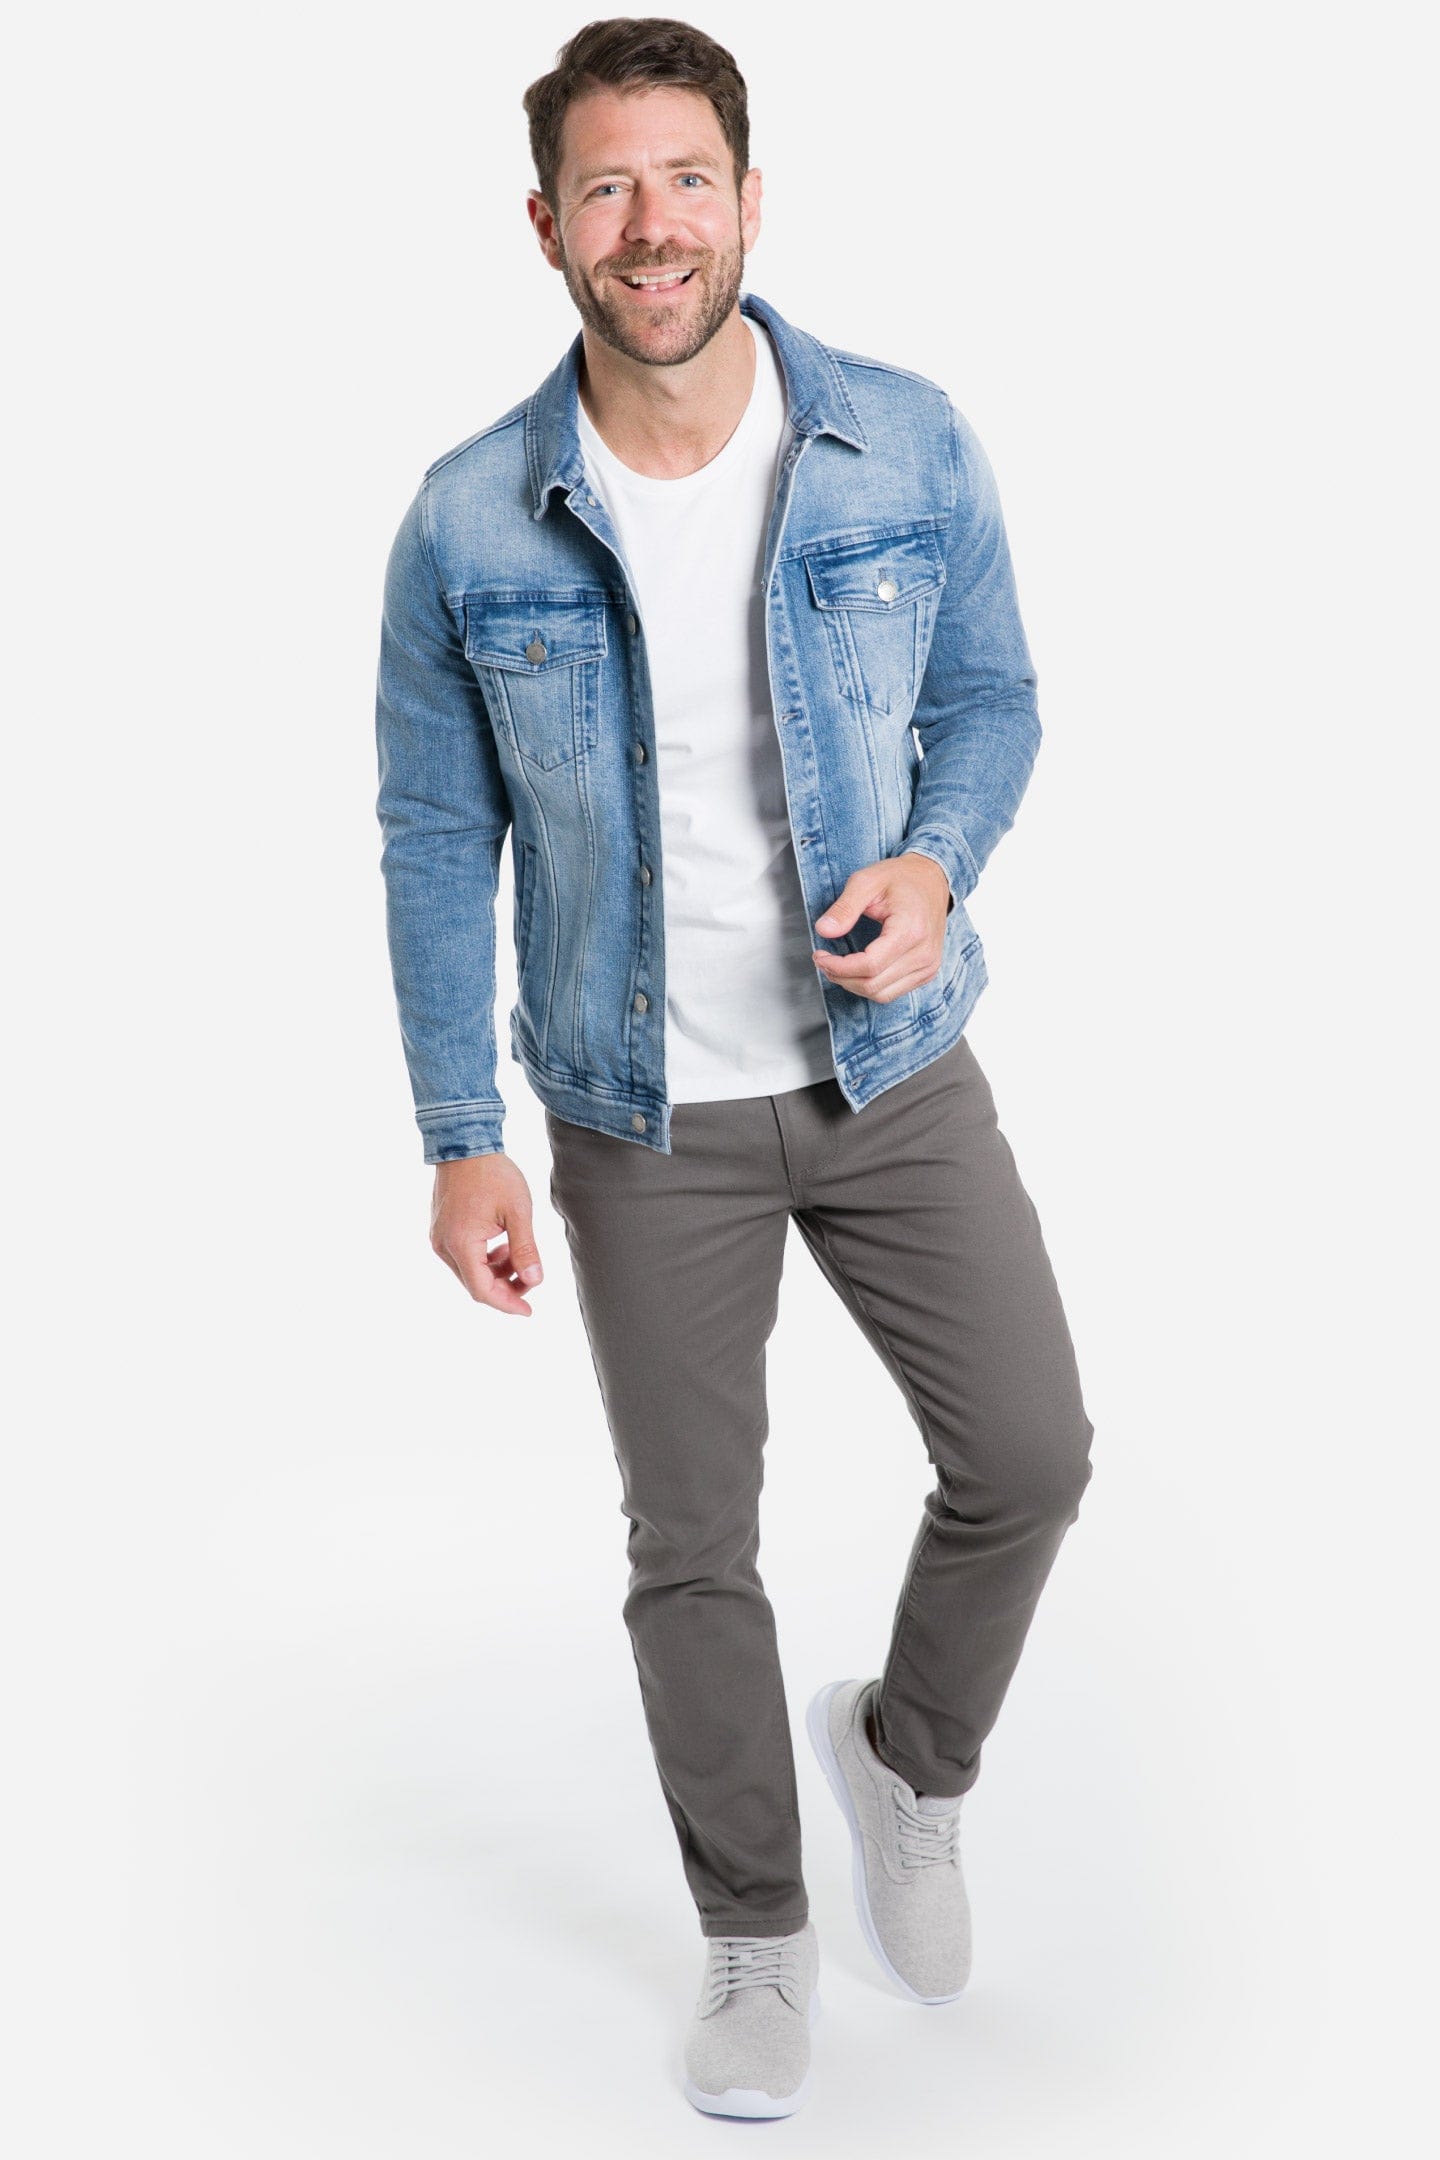 The New Rules Of Double Denim | FashionBeans | Leather jacket outfit men, Jean  jacket outfits men, Blue jean jacket outfits